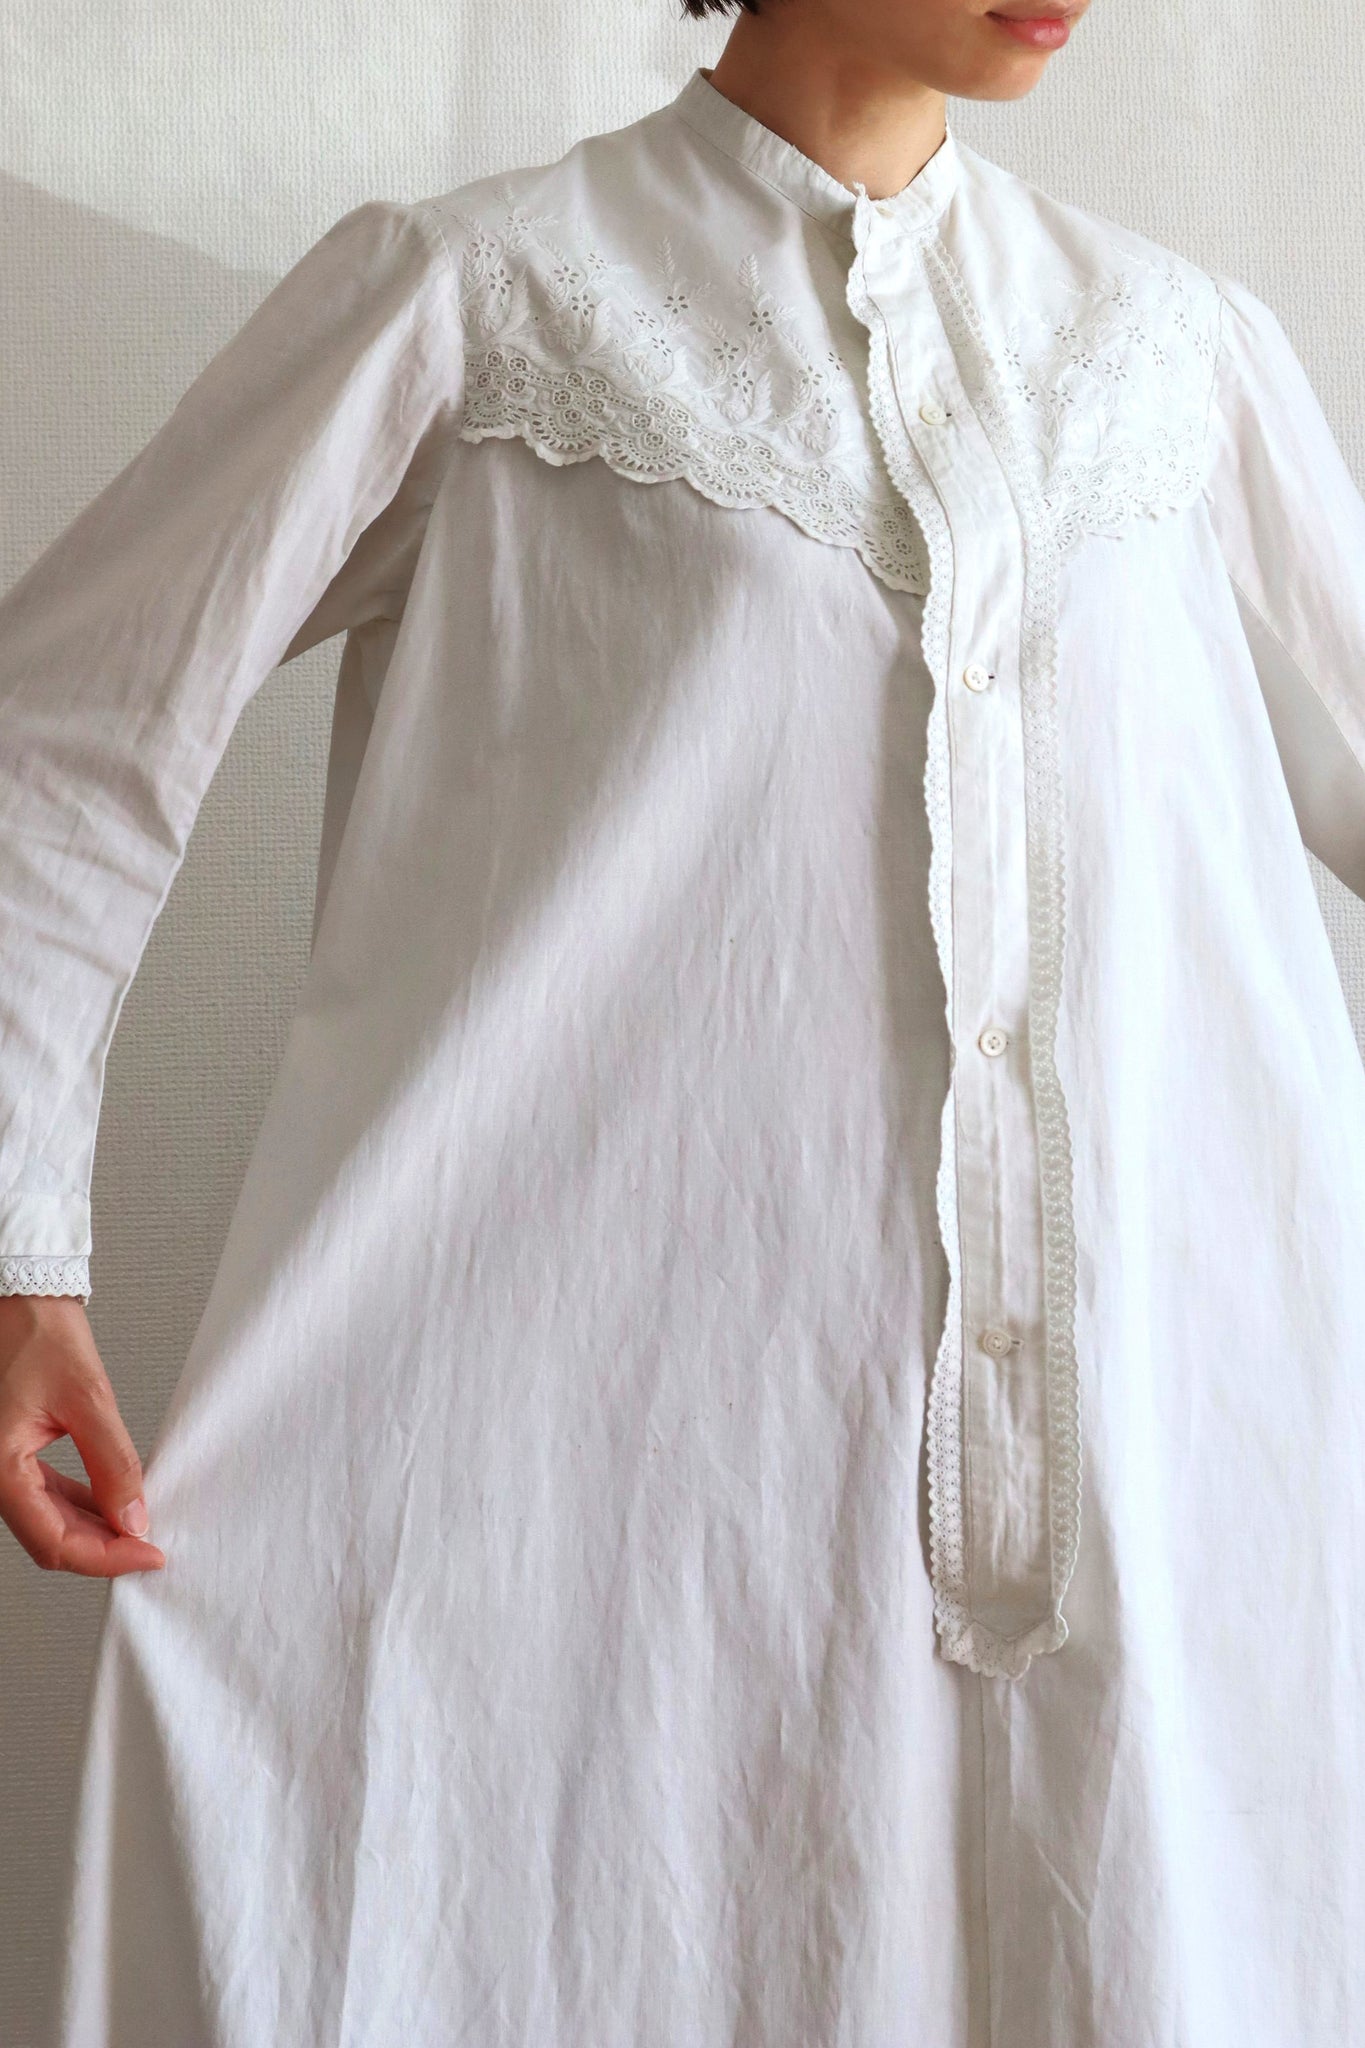 1900s Embroidery White Cotton Dress